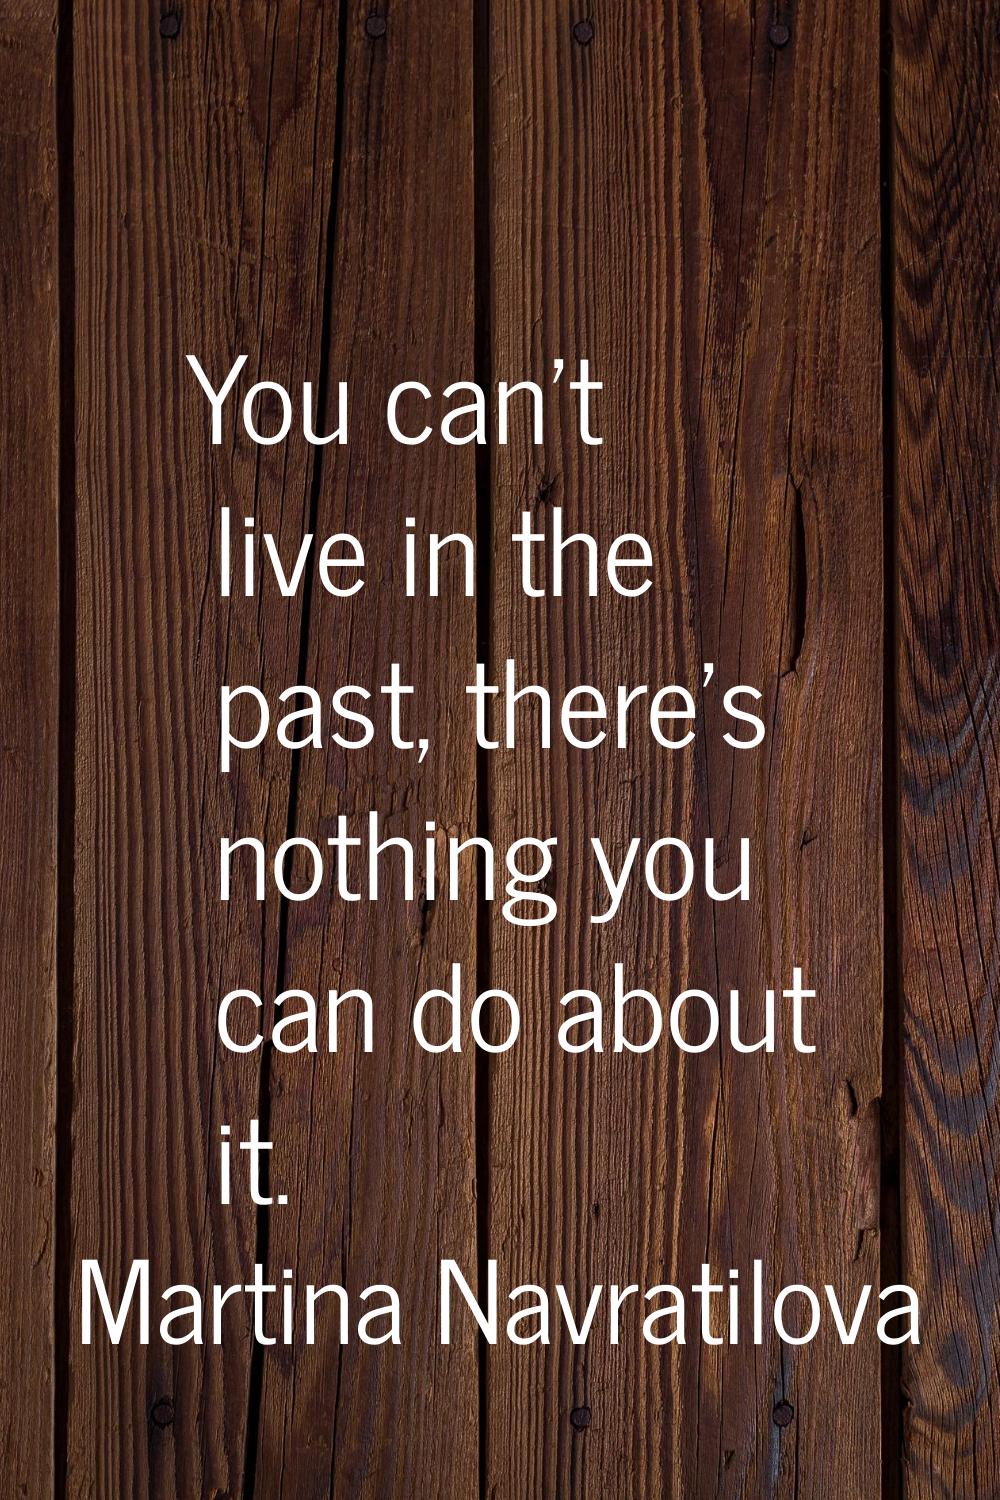 You can't live in the past, there's nothing you can do about it.